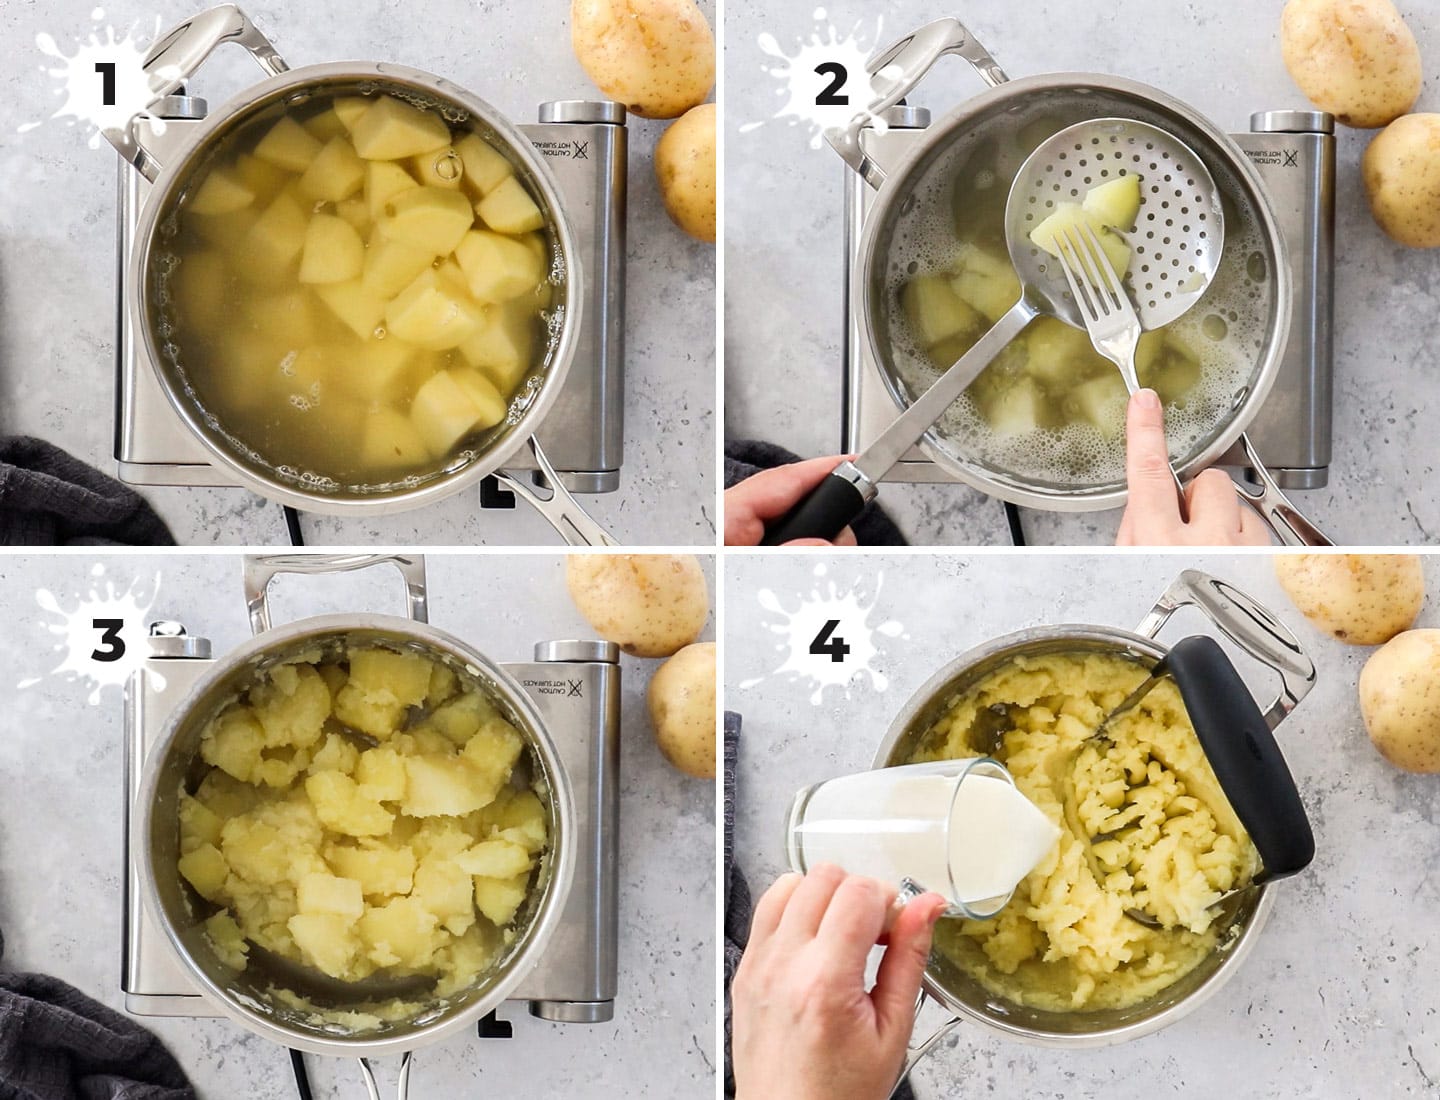 A collage of 4 images showing how to make mashed potatoes.